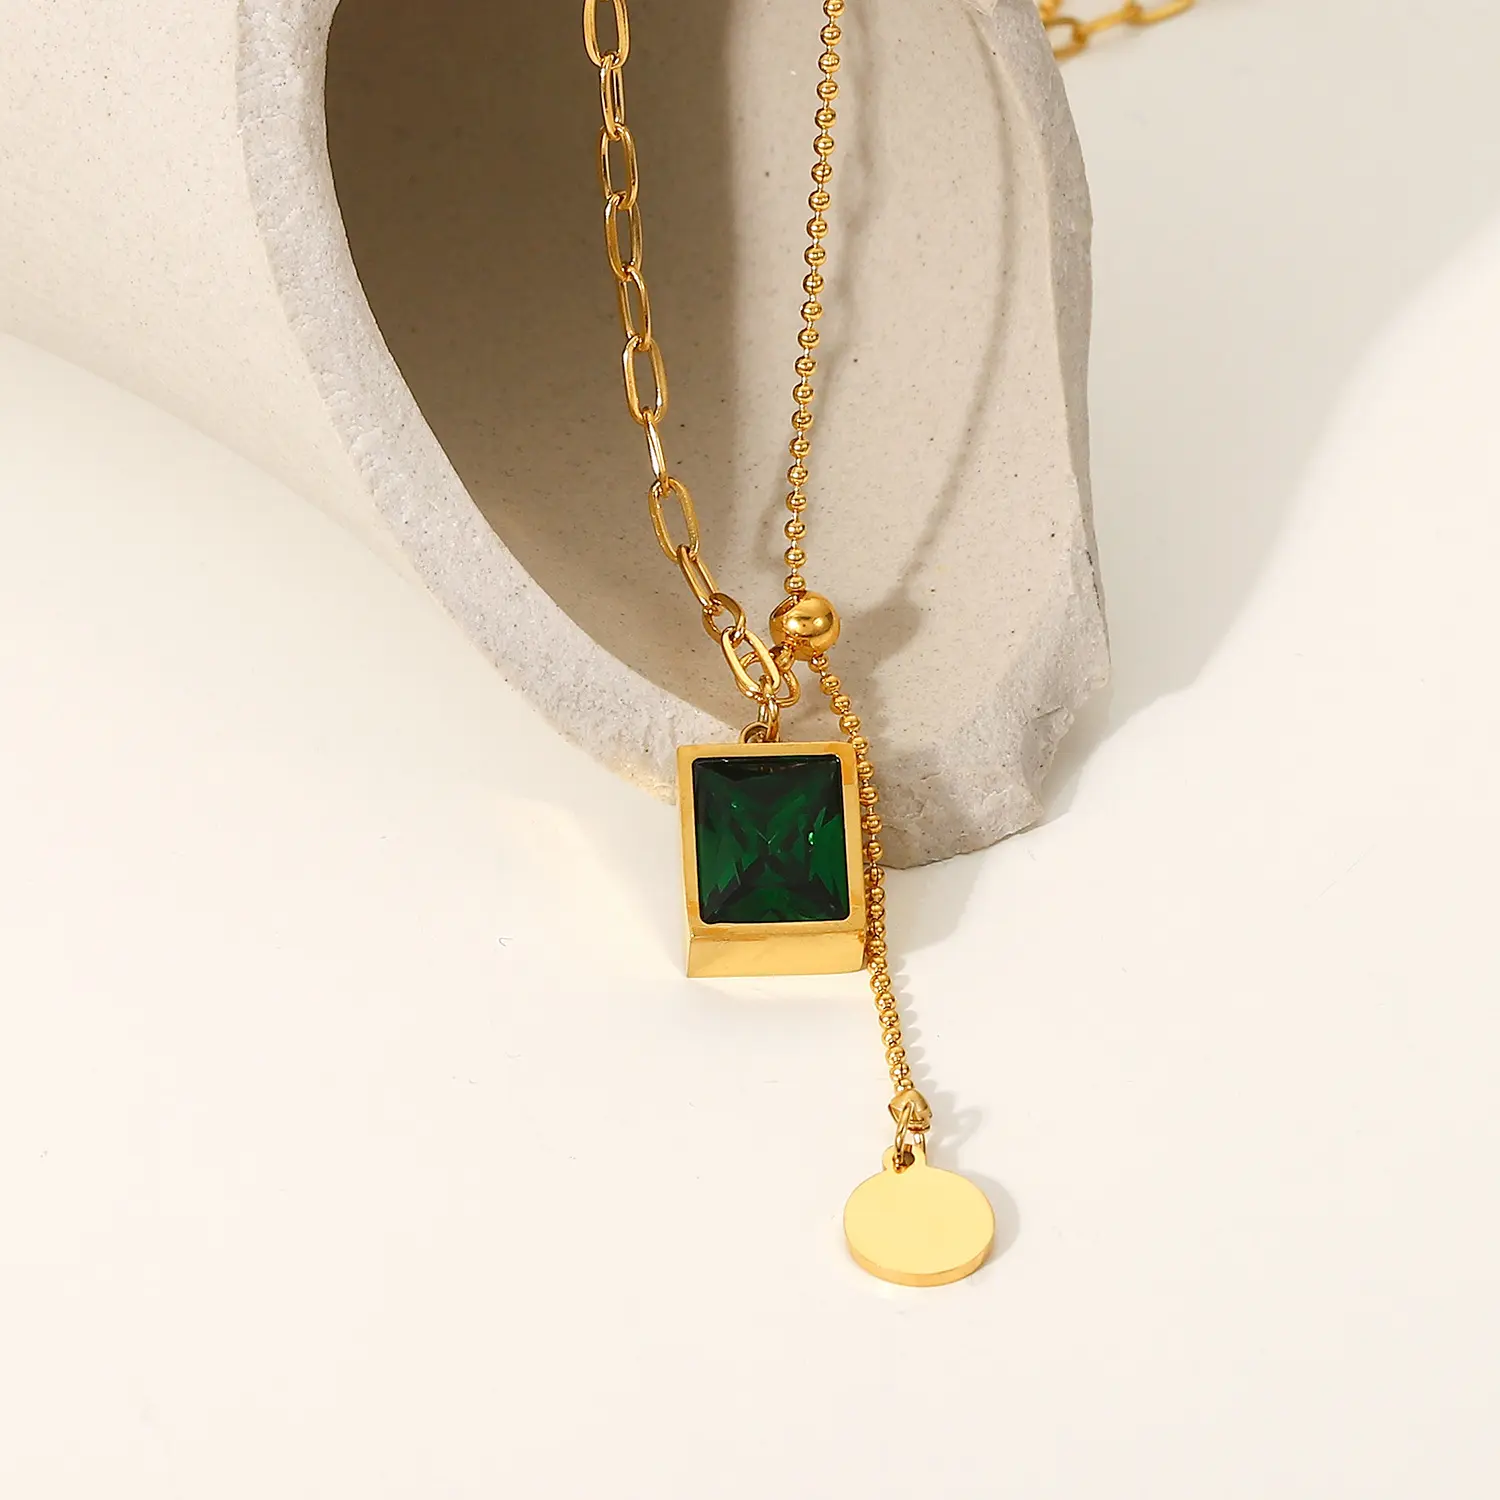 PVD Plated Stainless Steel 14K Gold Plated Necklace Square Green Zircon Pendant Necklace Bead Chain Necklace